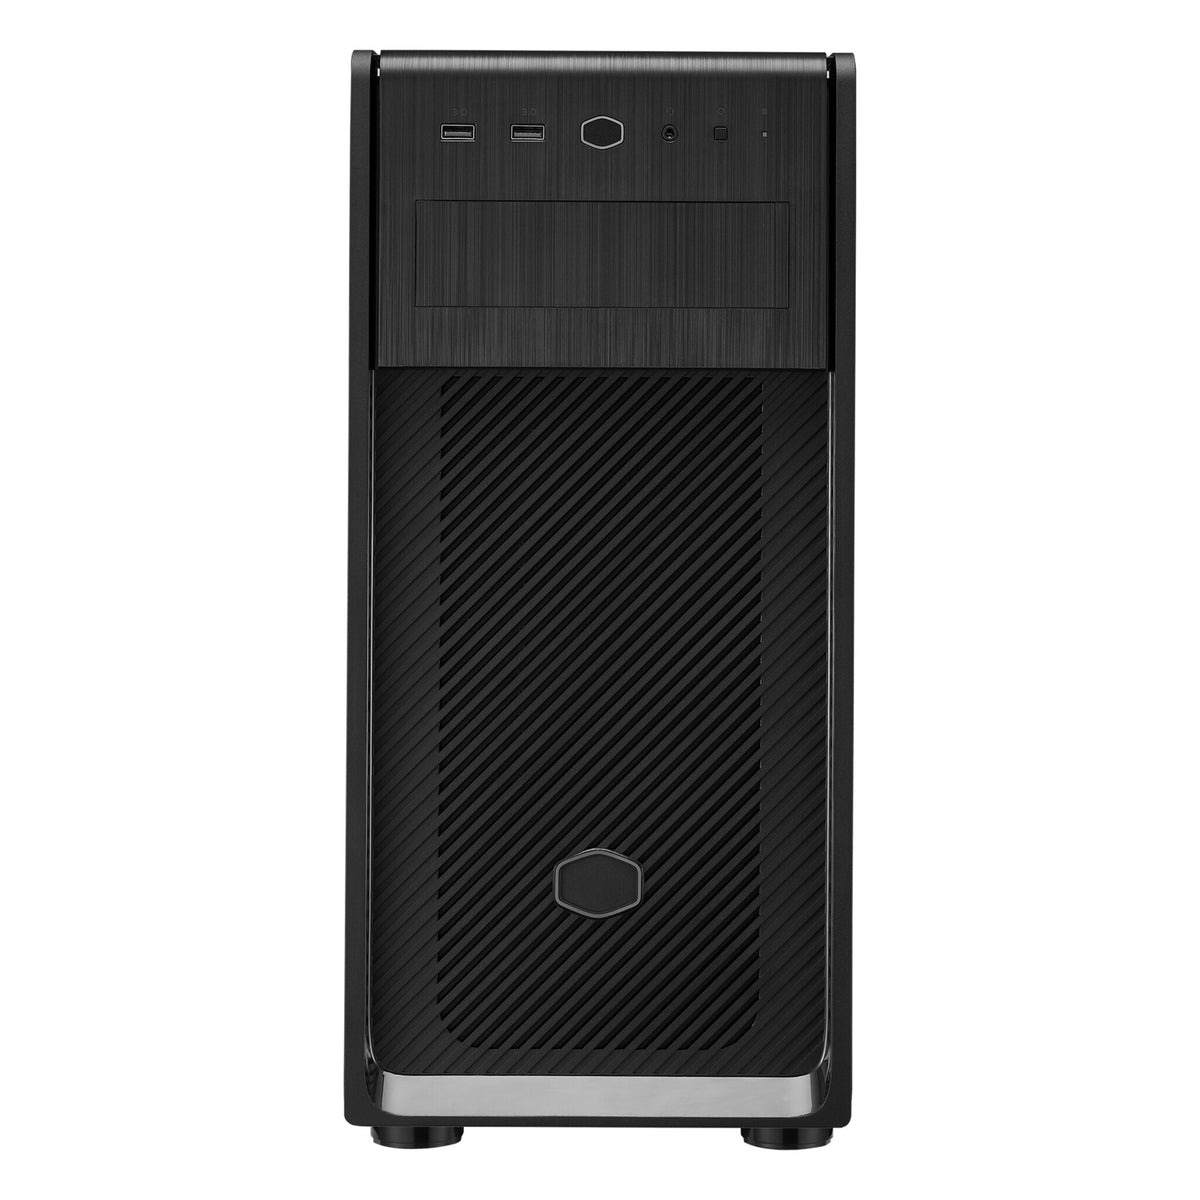 Cooler Master Elite 500 - ATX Mid Tower Case in Black (with ODD)